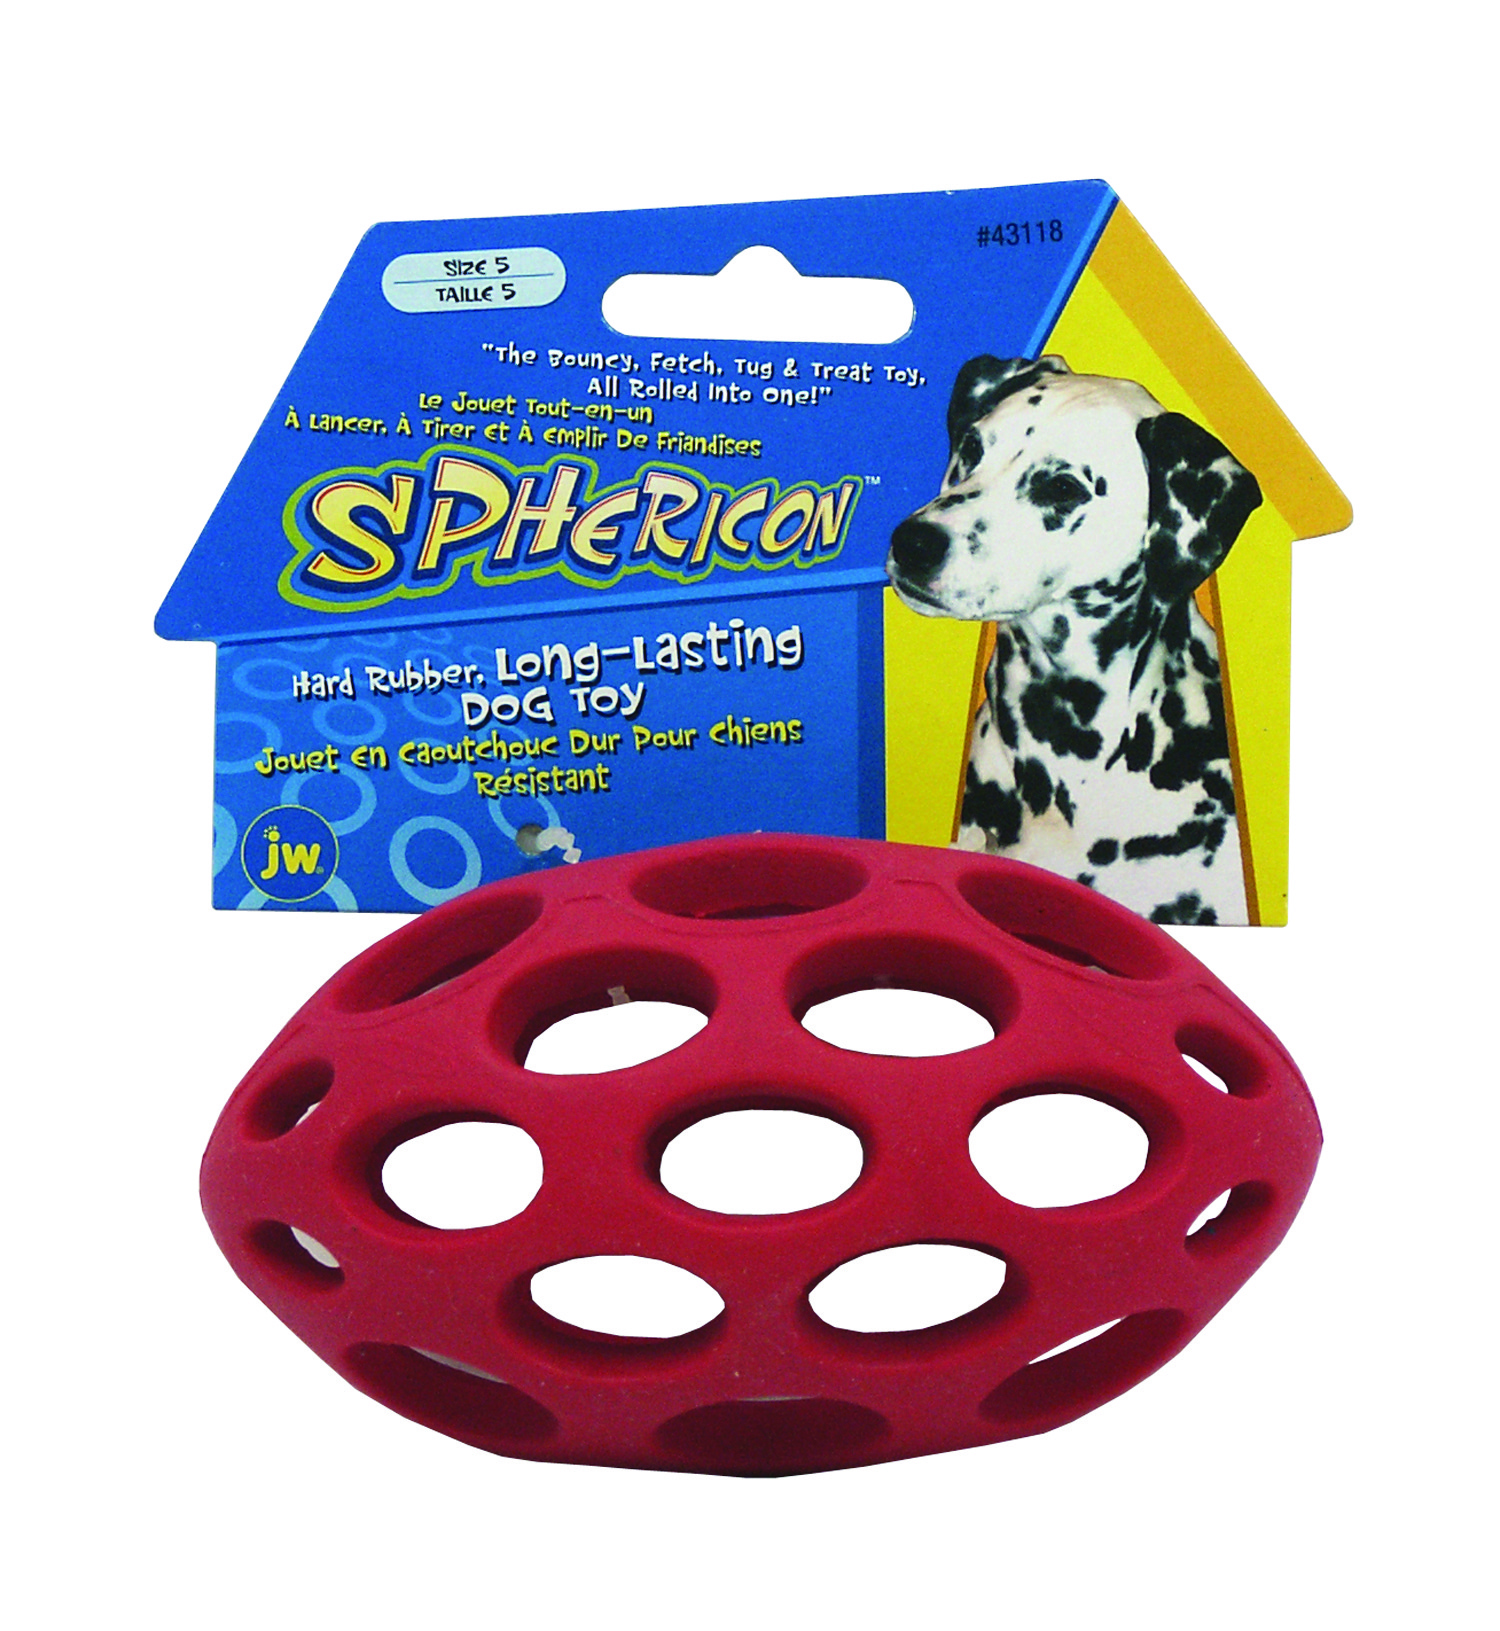 The sphericon 5 in colorful dog toy